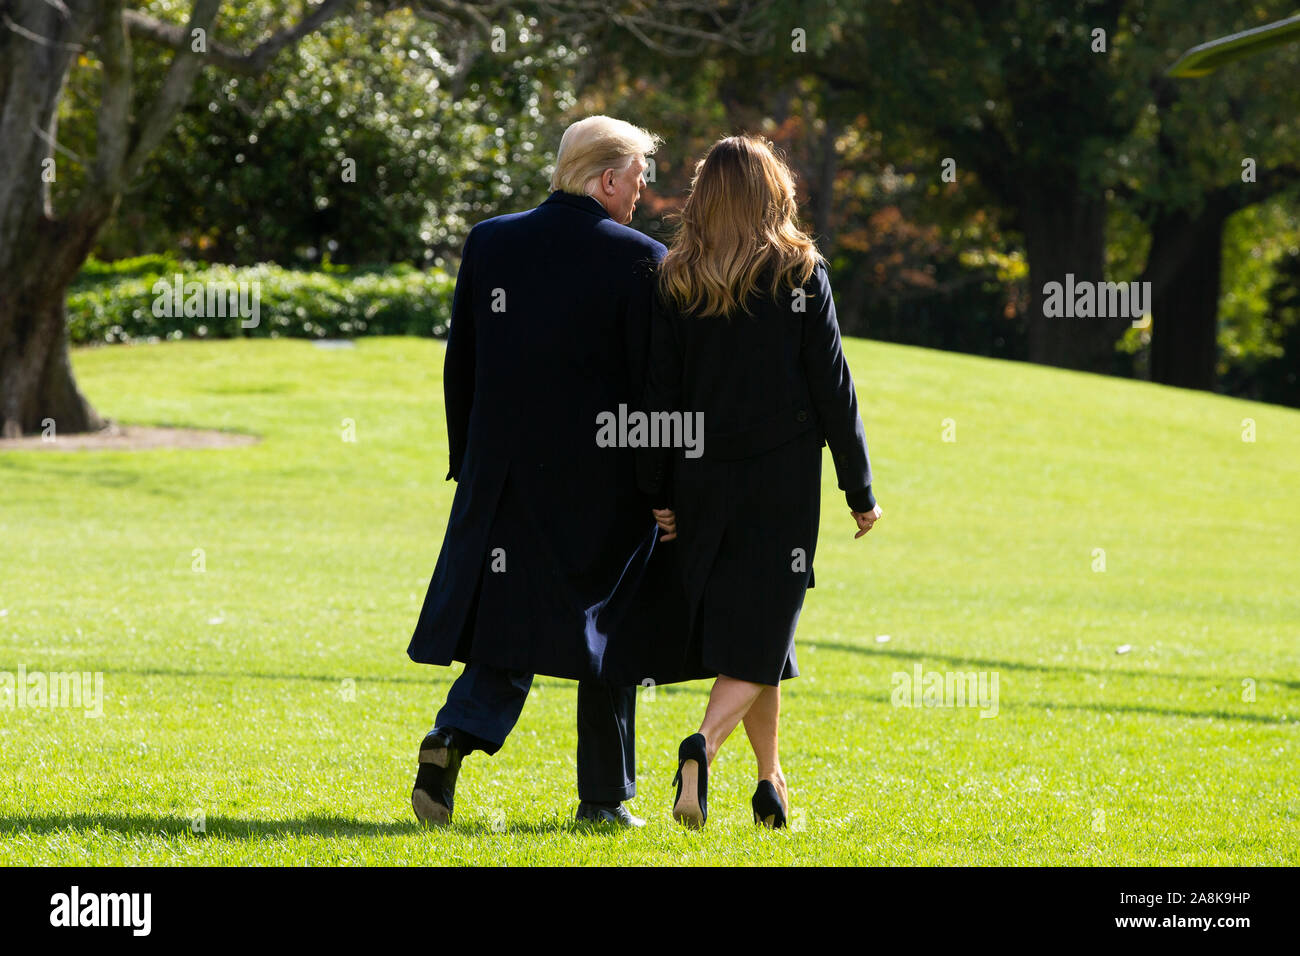 Washington DC, USA. 09th Nov, 2019. US President Donald J. Trump (L) and First Lady Melania Trump (R) walk aross the South Lawn of the White House to depart by Marine One in Washington, DC, USA, 09 November 2019. The President and First Lady will attend a National Collegiate Athletic Association (NCAA) football game between Alabama and Louisiana State University in Tuscaloosa, Alabama; then they will stay in New York City through Veterans Day. Credit: MediaPunch Inc/Alamy Live News Stock Photo